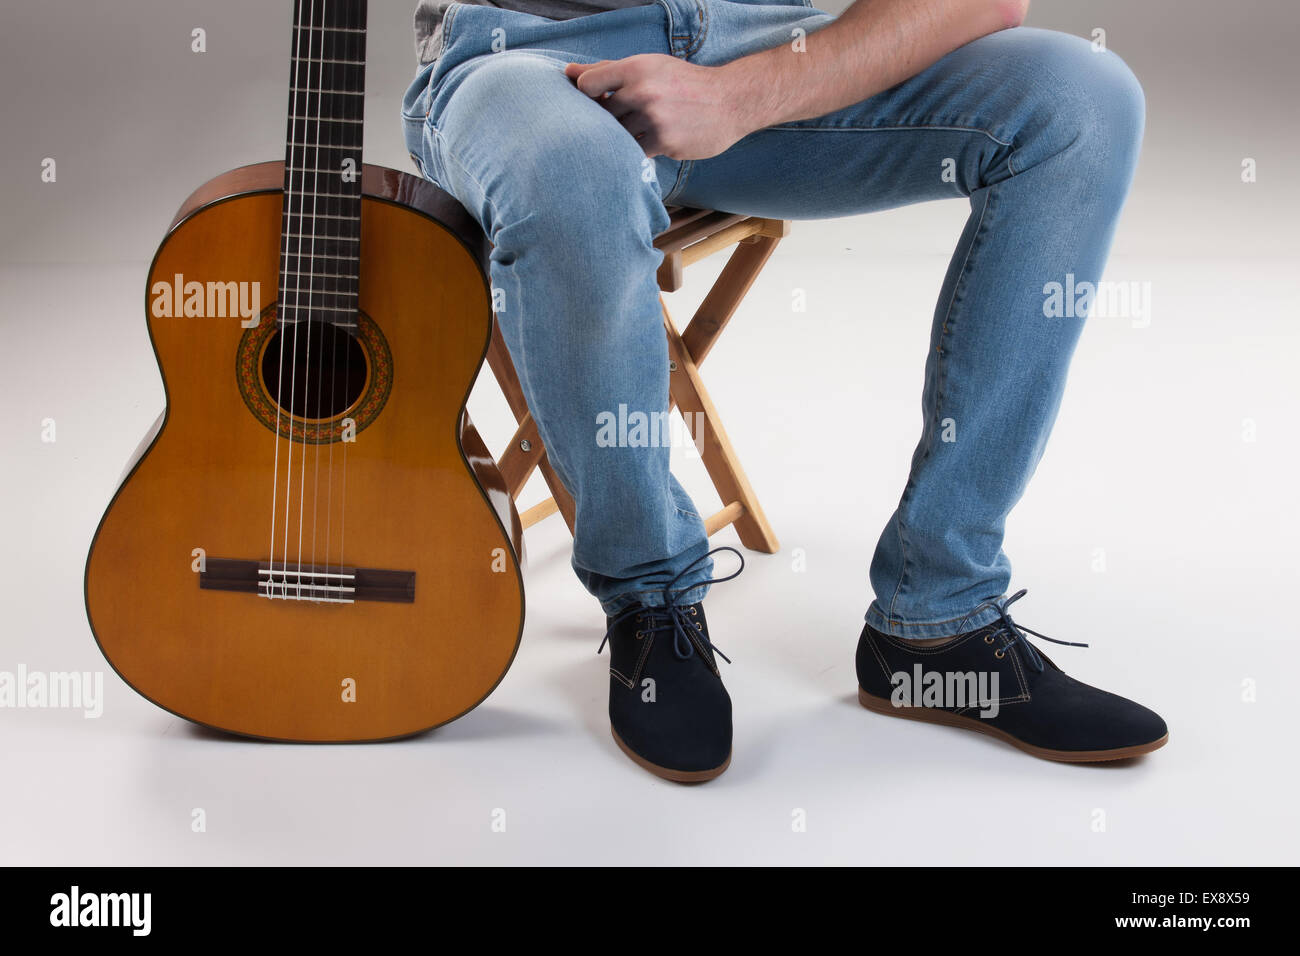 man men male studio jeans denim object background guitar play body part music instrument isolated group string art shoes neck Stock Photo